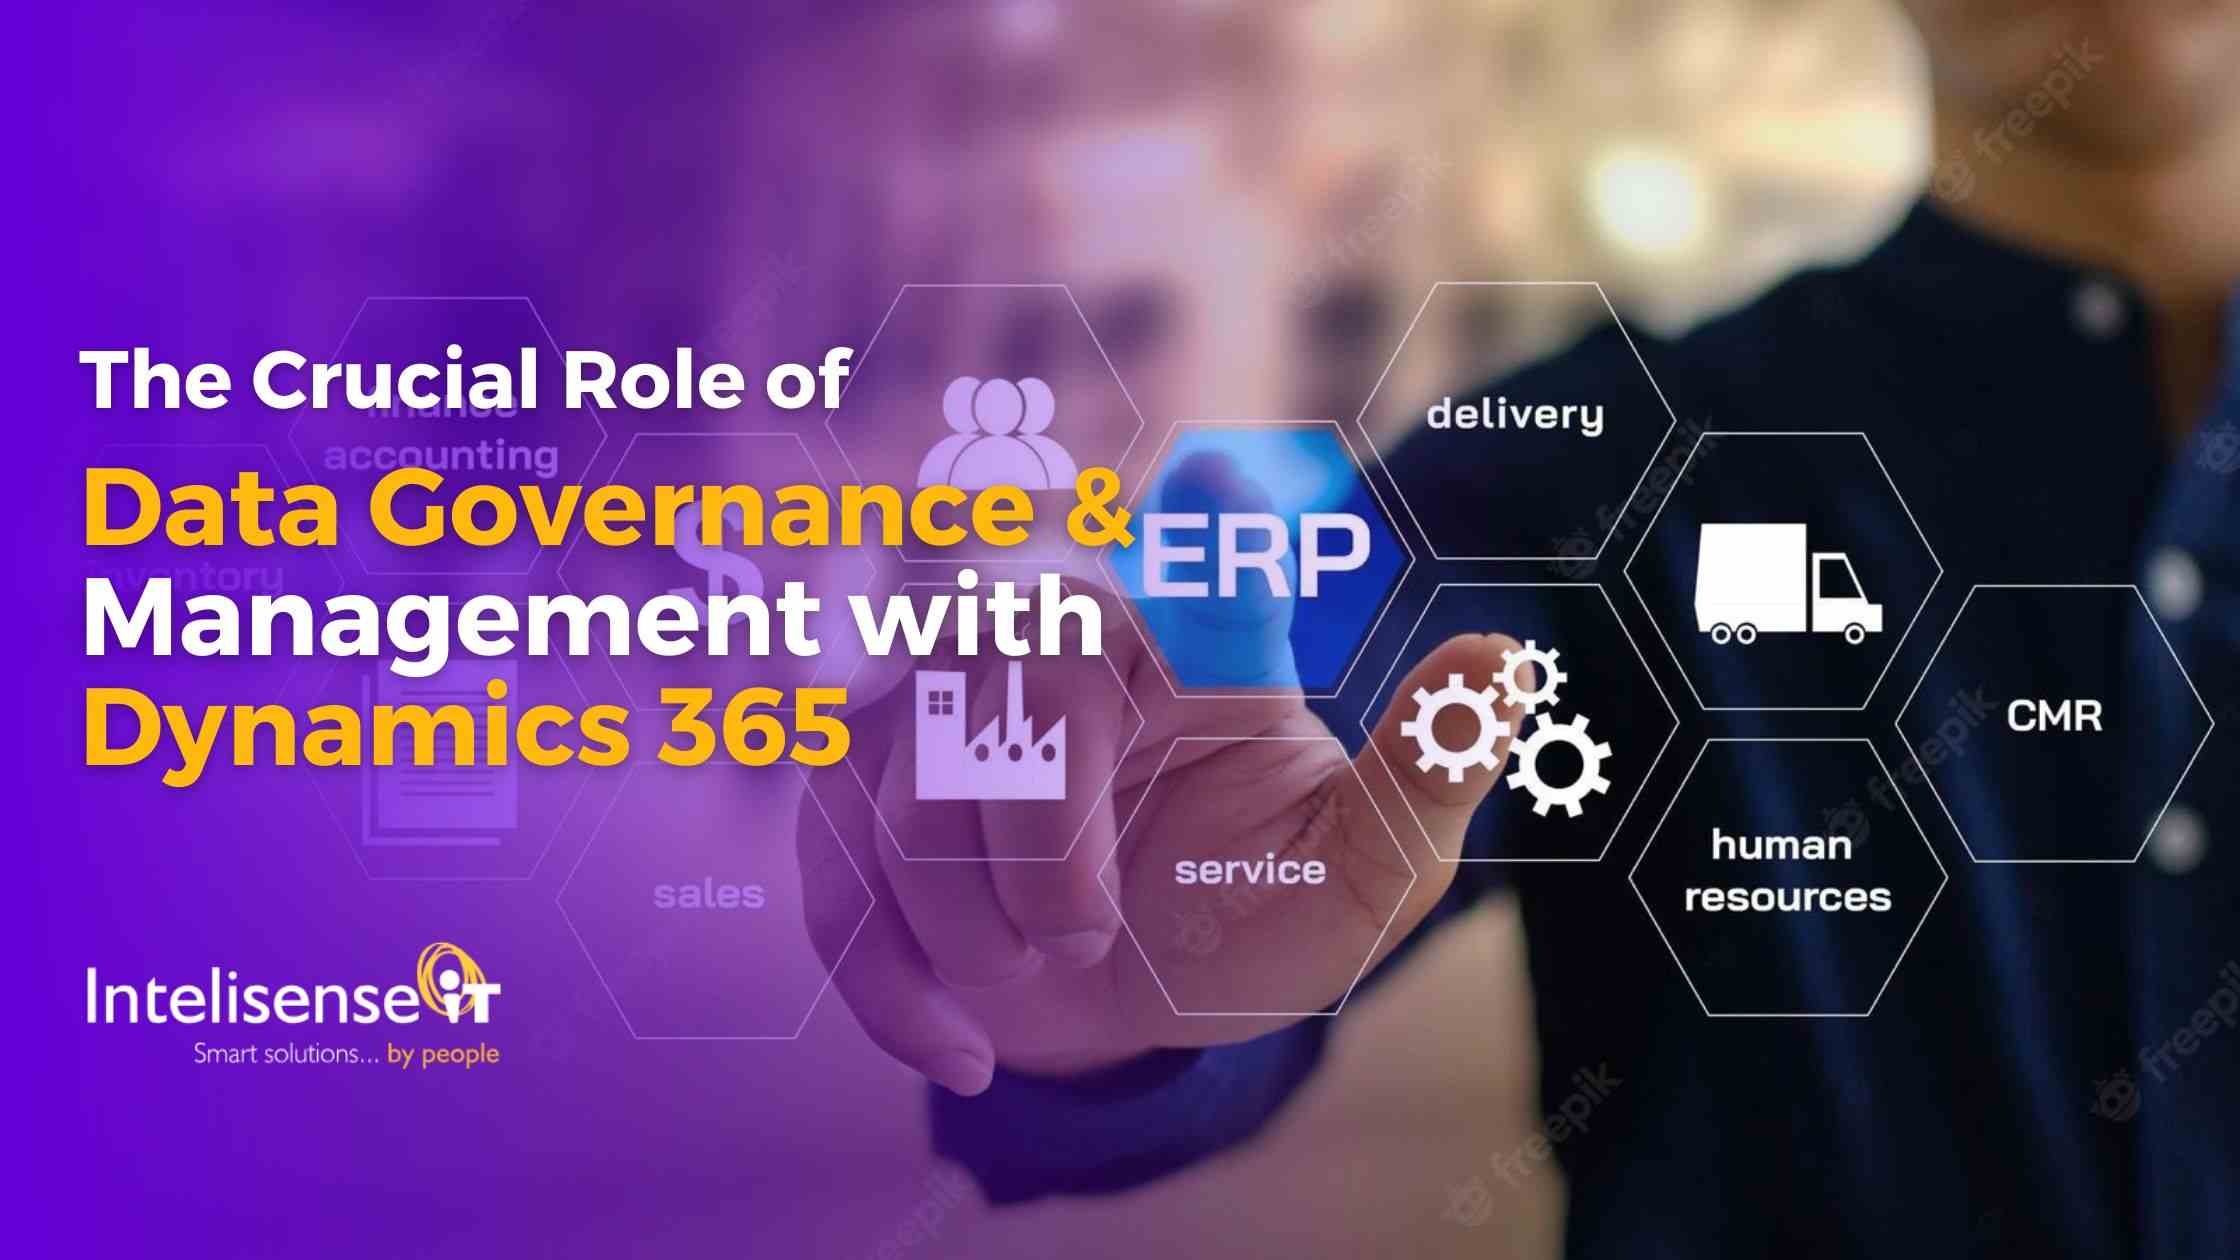 Data Governance and Management with Dynamics 365